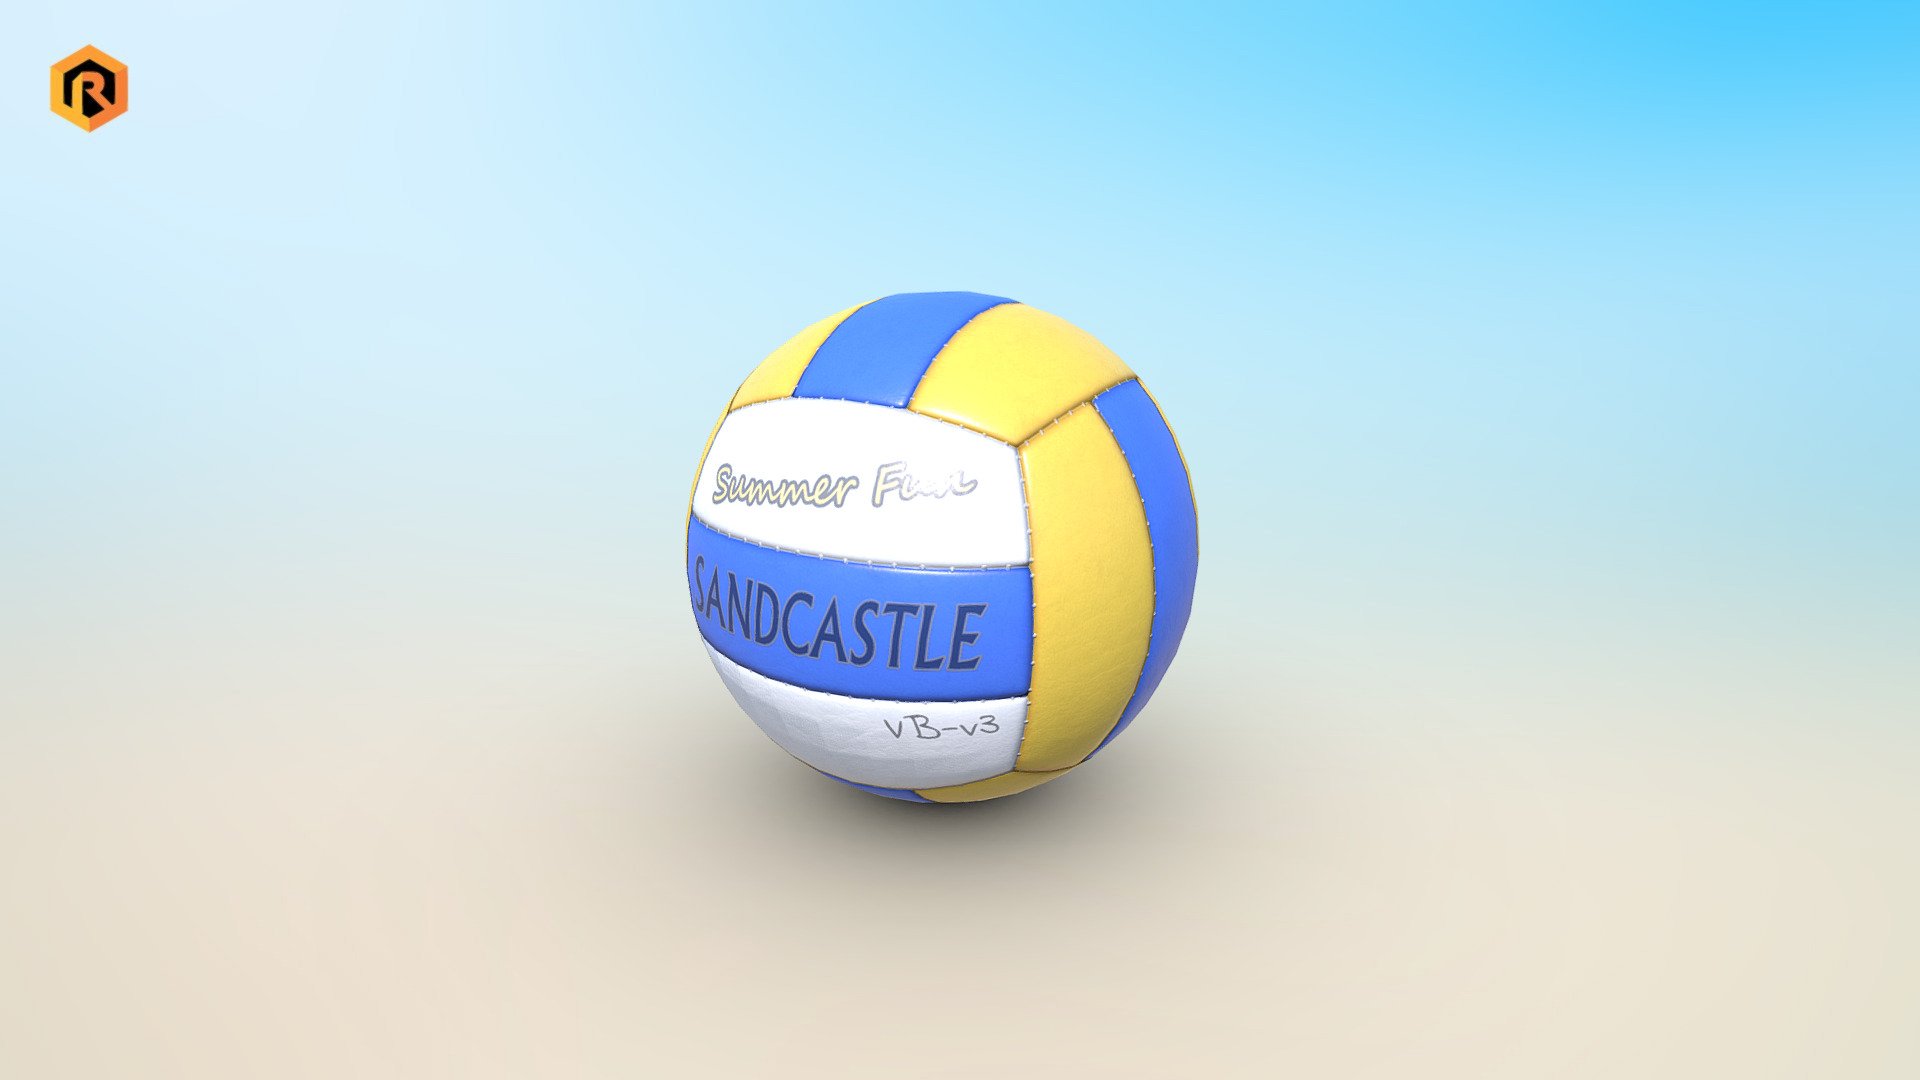 High-quality PBR low-poly 3D model of Volleyball.

It is best for use in games and other VR / AR, real-time applications such as Unity or Unreal Engine. 

It can also be rendered in Blender (ex Cycles) or Vray as the model is equipped with all required PBR textures. 

Model is built with great attention to details and realistic proportions with correct geometry.

PBR texture sets are very detailed so it makes this model good enough for close-up.  

Technical details: 

- 2048px PBR texture set (Albedo, Metallic, Smoothness, Normal, Ambient Occlusion). 

- 1200 Triangles.

- 726  Vertices.

- Model is one mesh.

- Model completely unwrapped.

- Model is fully textured with all materials applied.

- Pivot points are correctly placed to suit animation process.

- Model scaled to approximate real world size (centimeters).

- All nodes, materials and textures are appropriately named 3d model